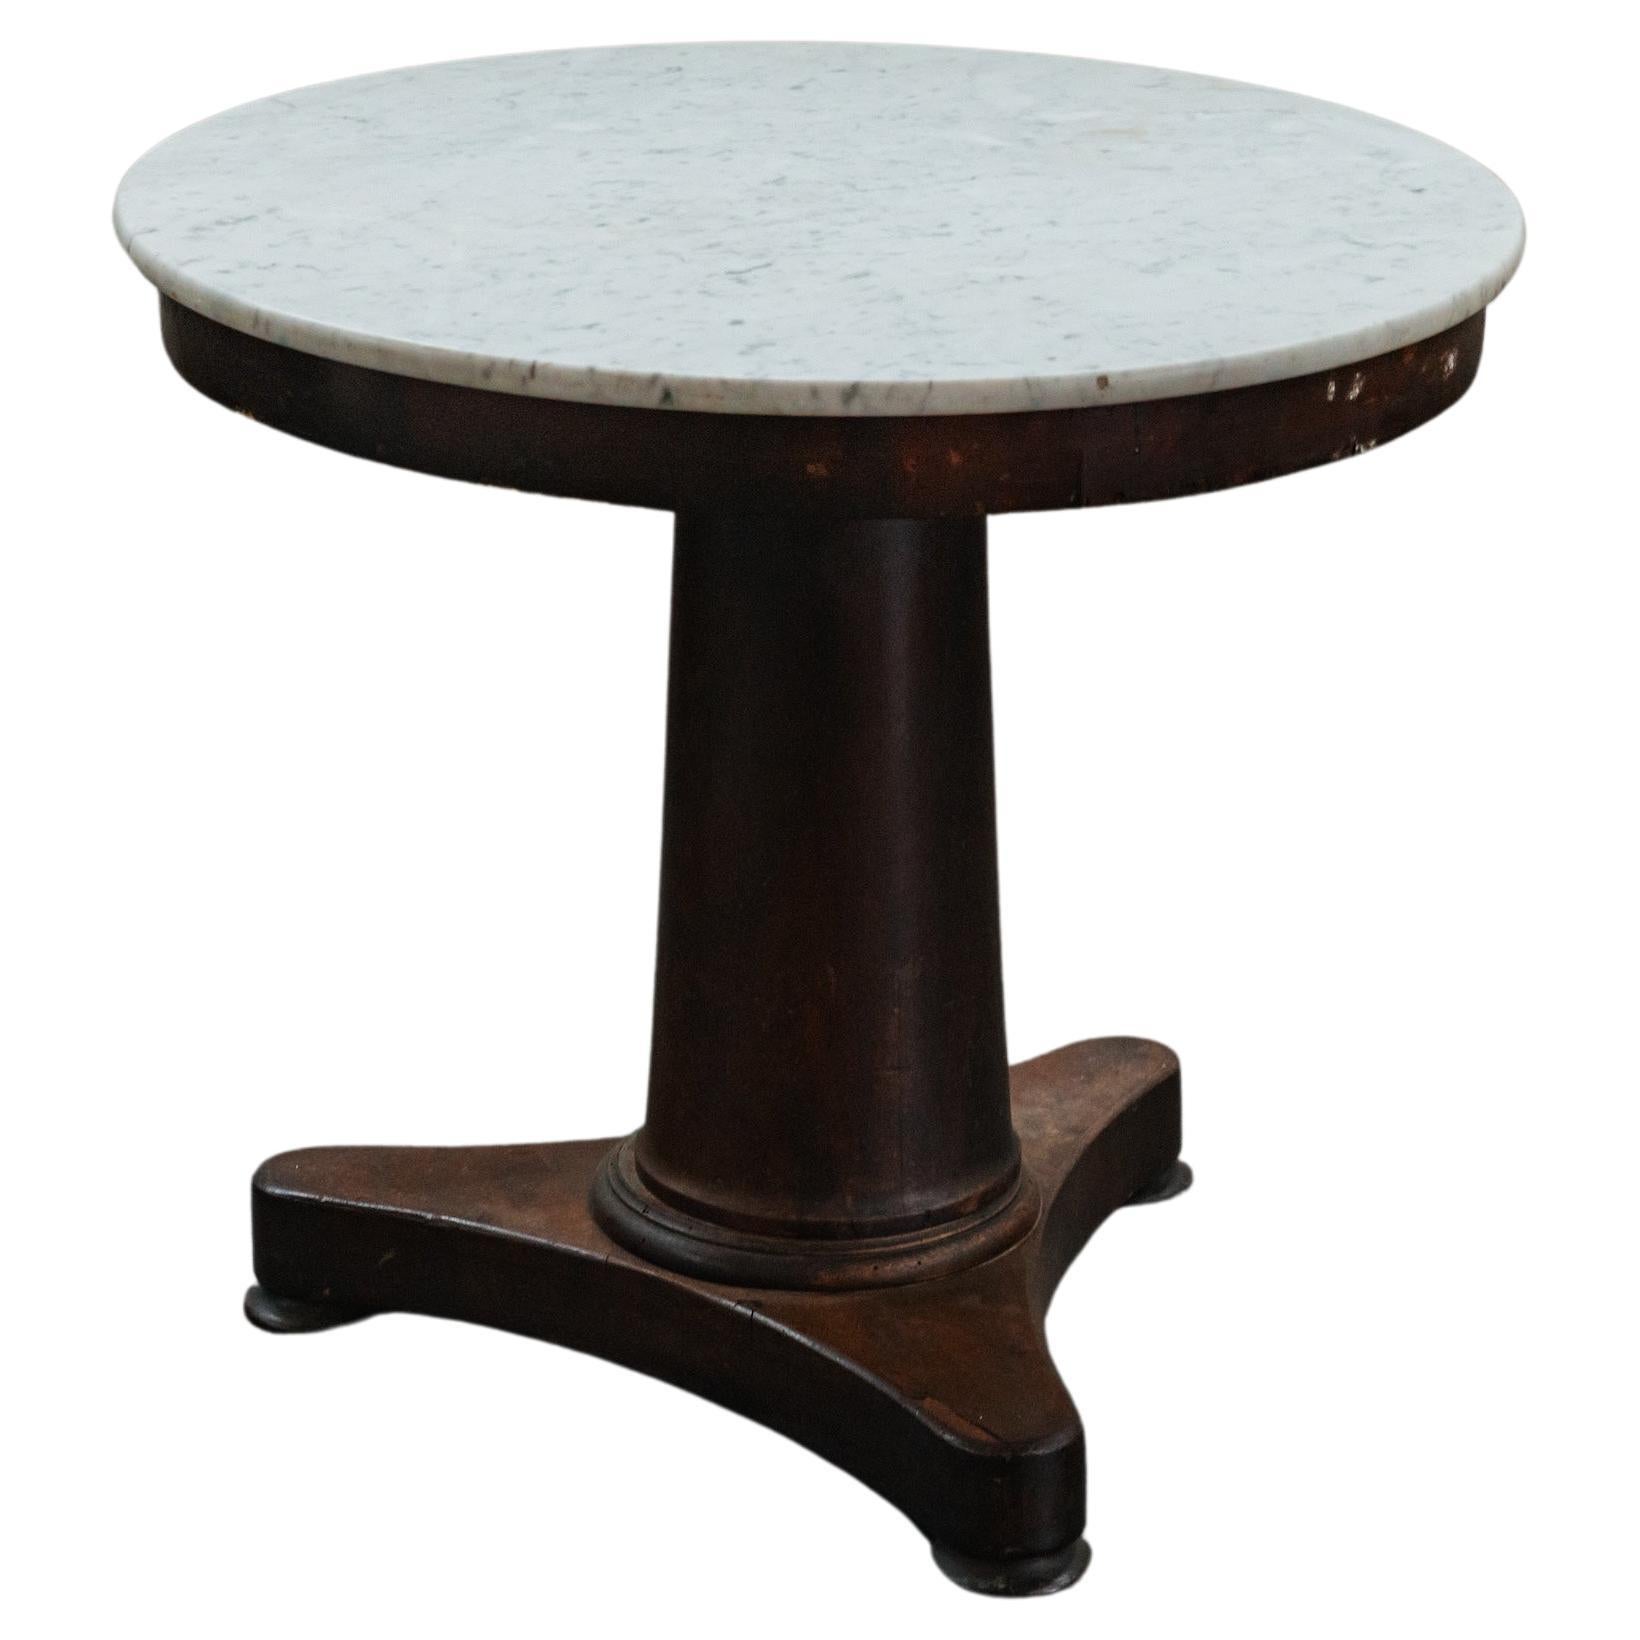 Vintage Marble Empire Table From France, Circa 1900